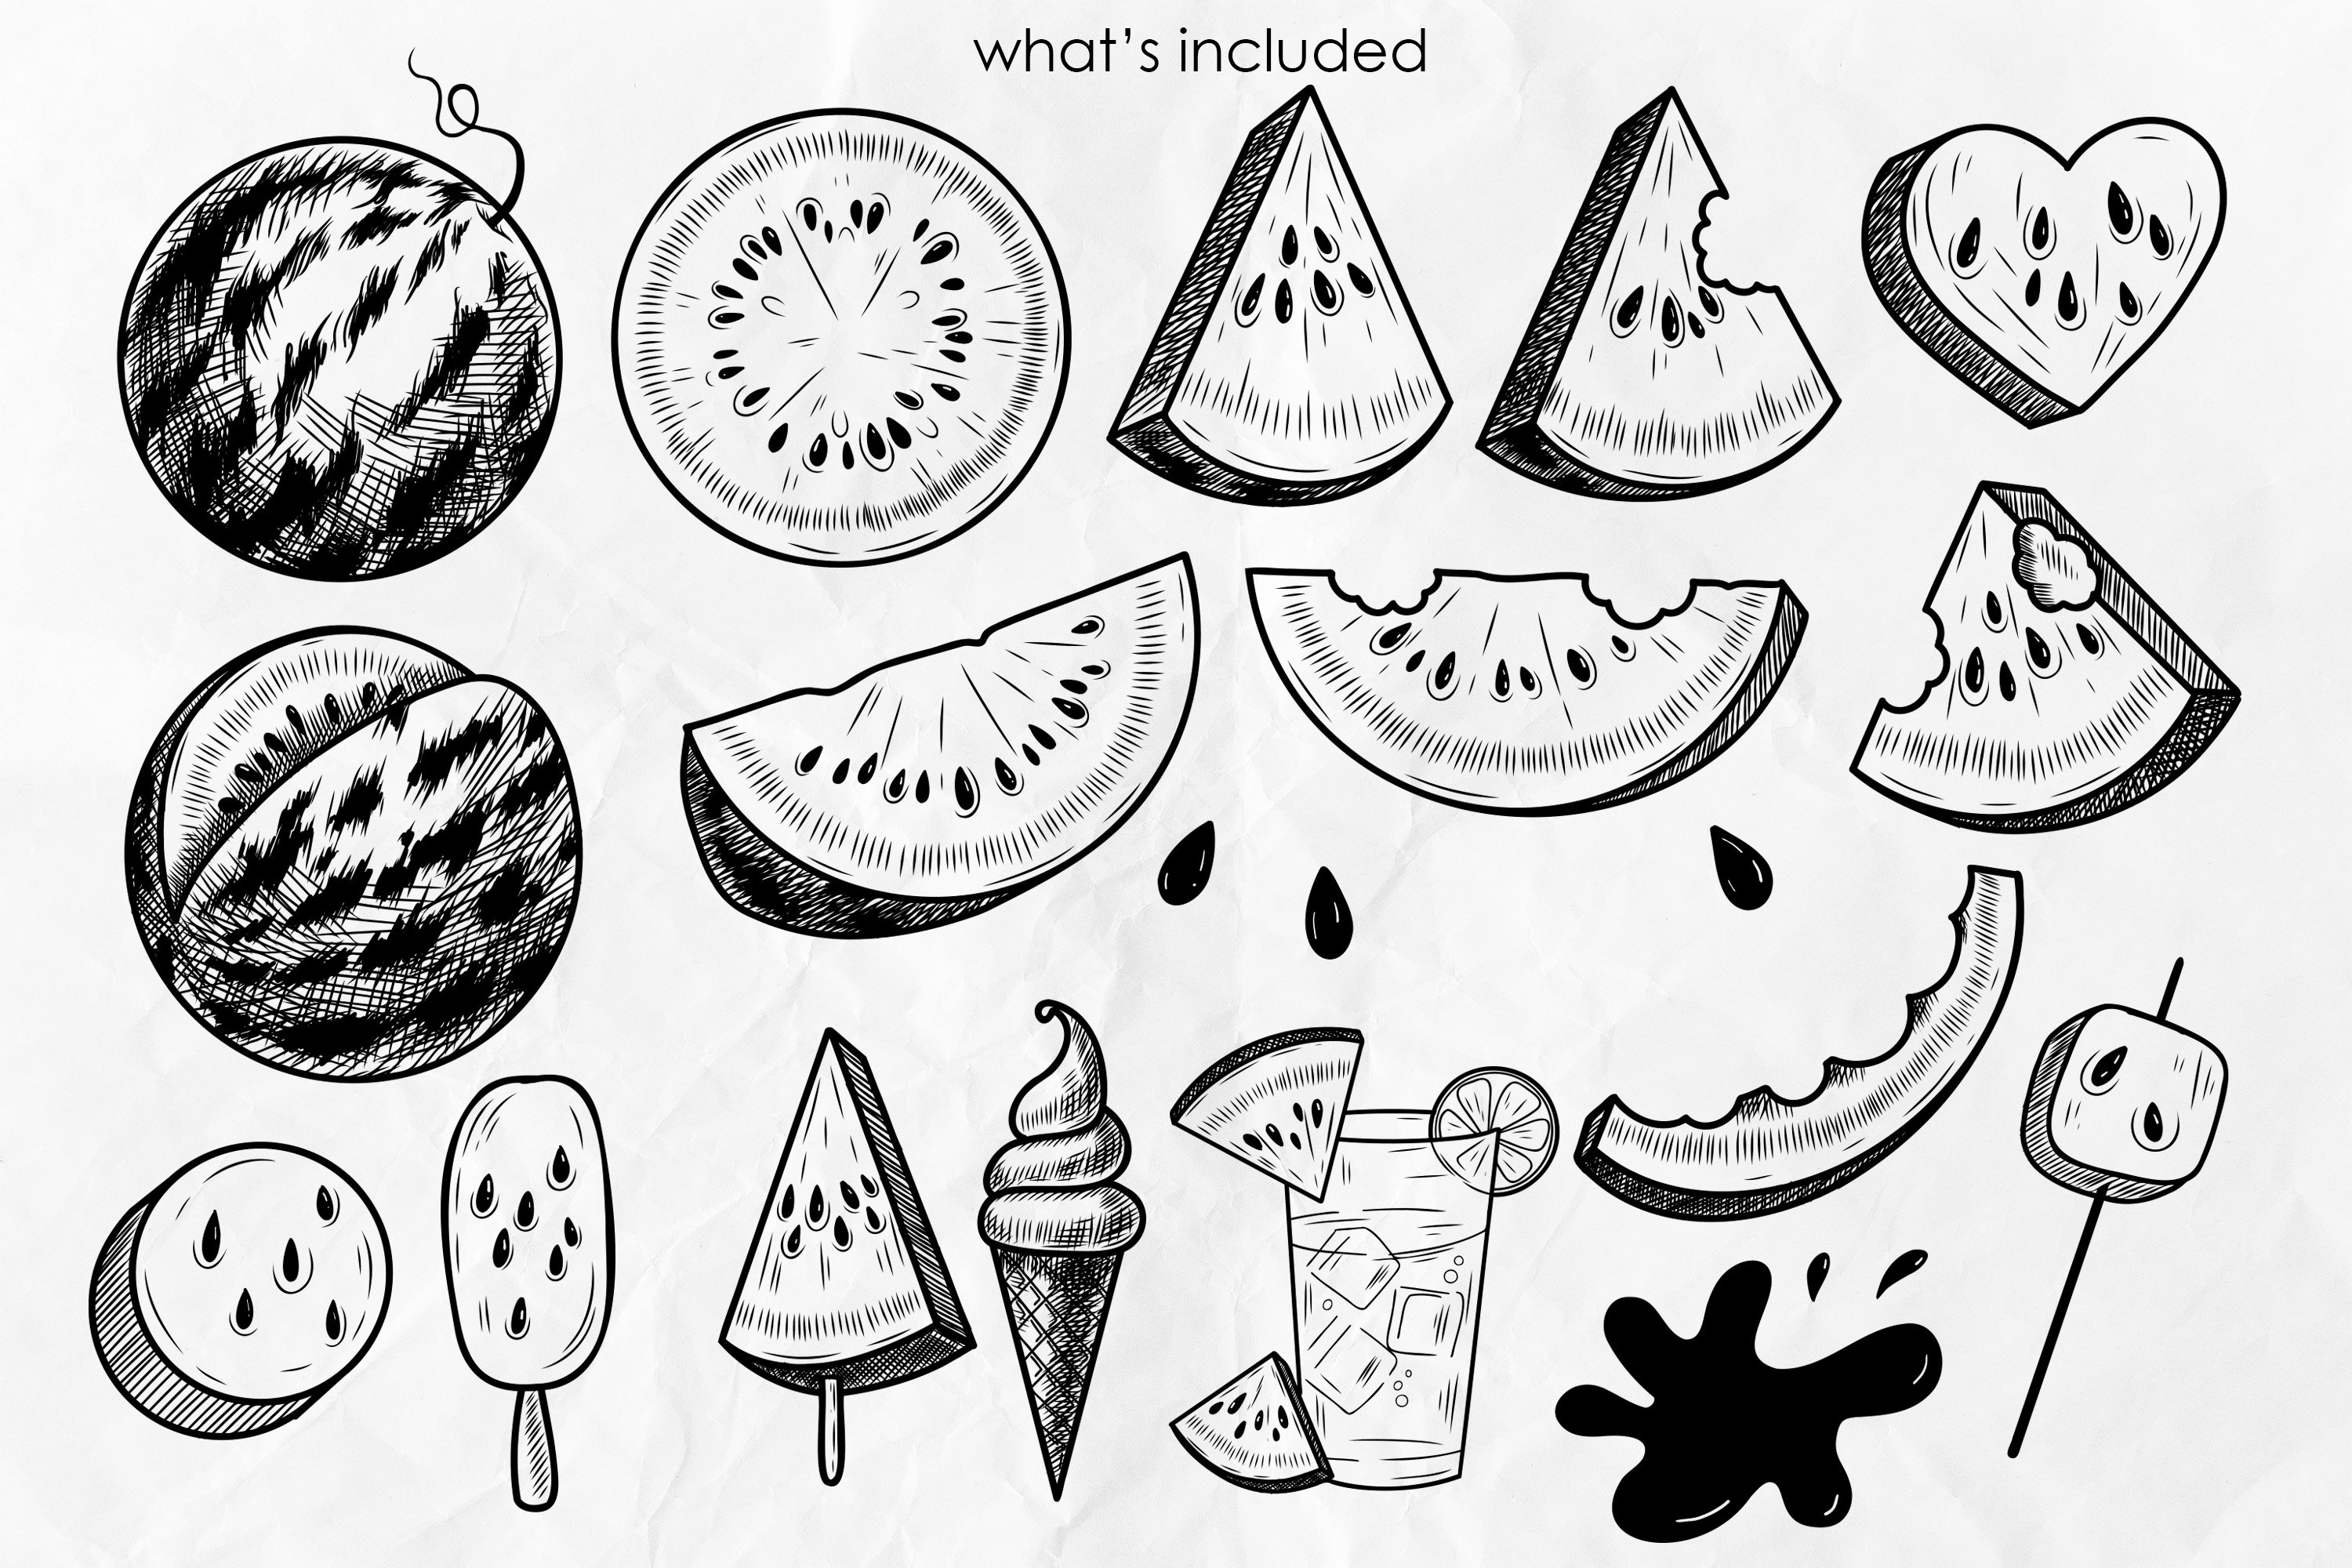 How to draw Watermelon 🍉 drawing easy| Easy watermelon 🍉 drawing easy| Watermelon  drawing - YouTube